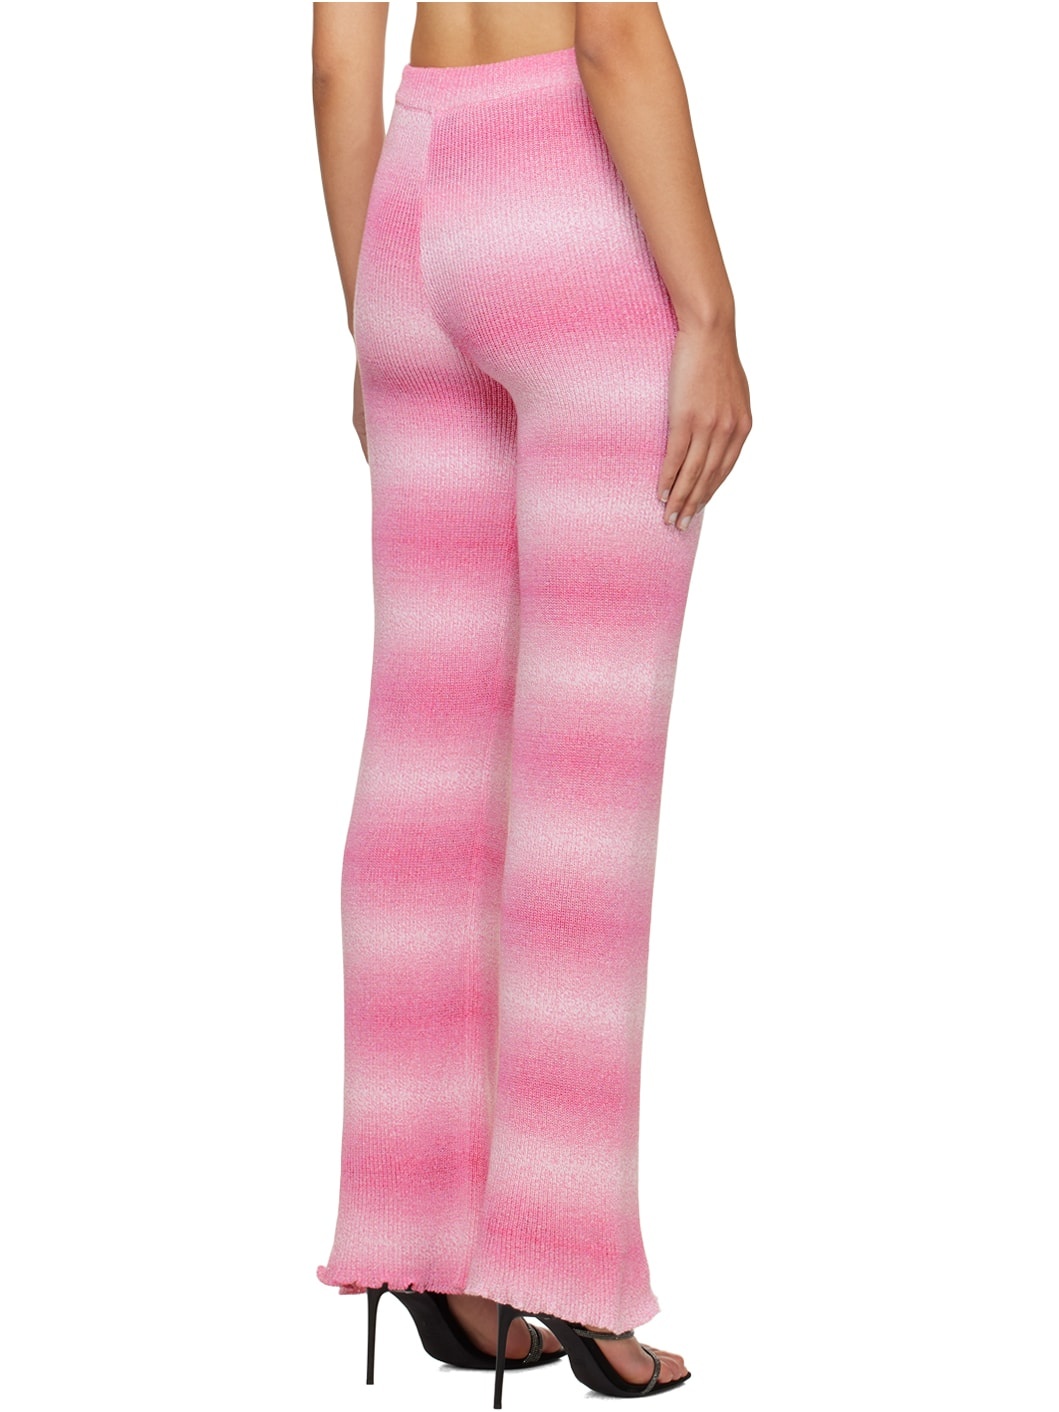 Pink Gradient Trousers - 3